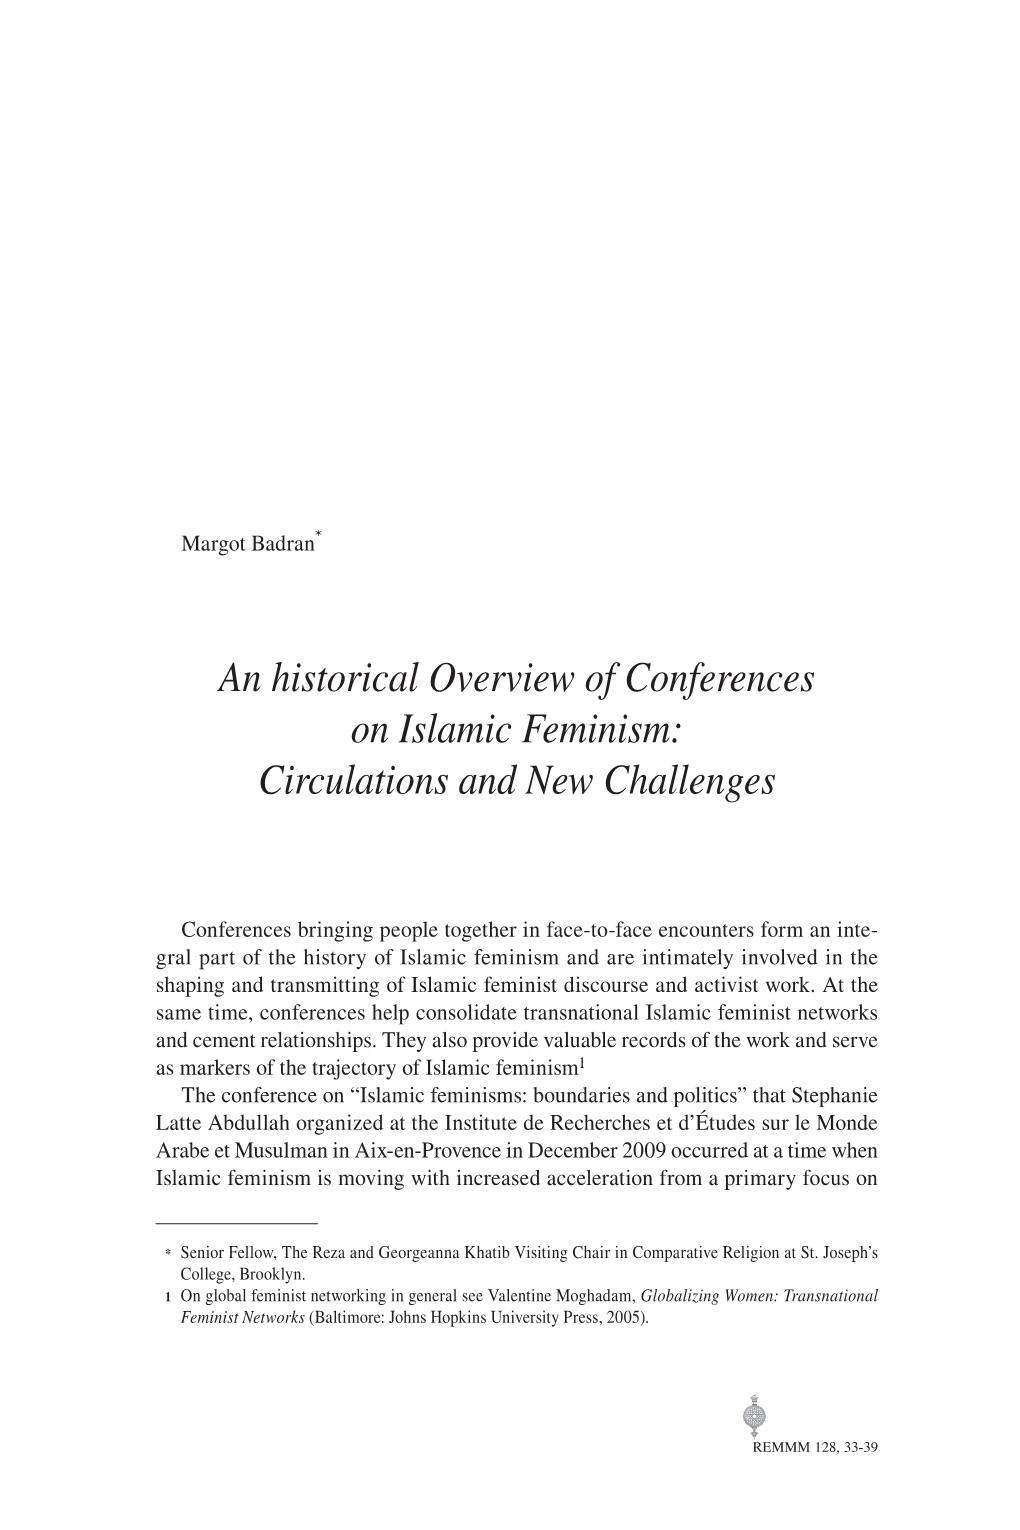 An Historical Overview of Conferences on Islamic Feminism: Circulations and New Challenges